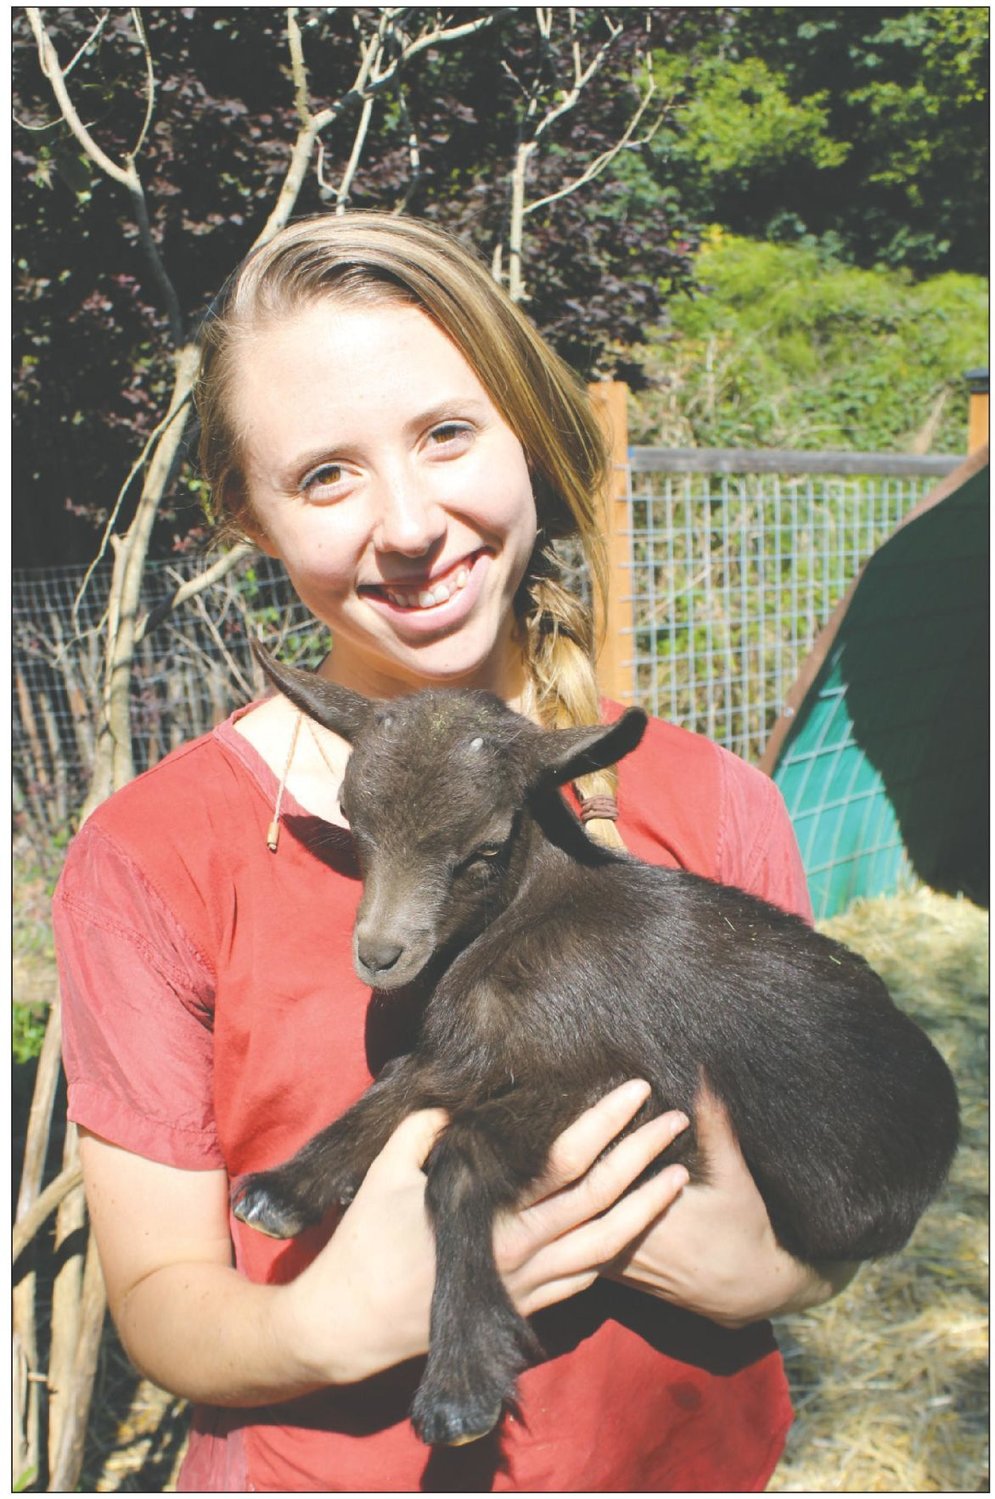 Grace Thompson, co-owner of Kodama Farm &amp; Food Forest holds one of their baby goats they are raising to eventually make goat cheese.